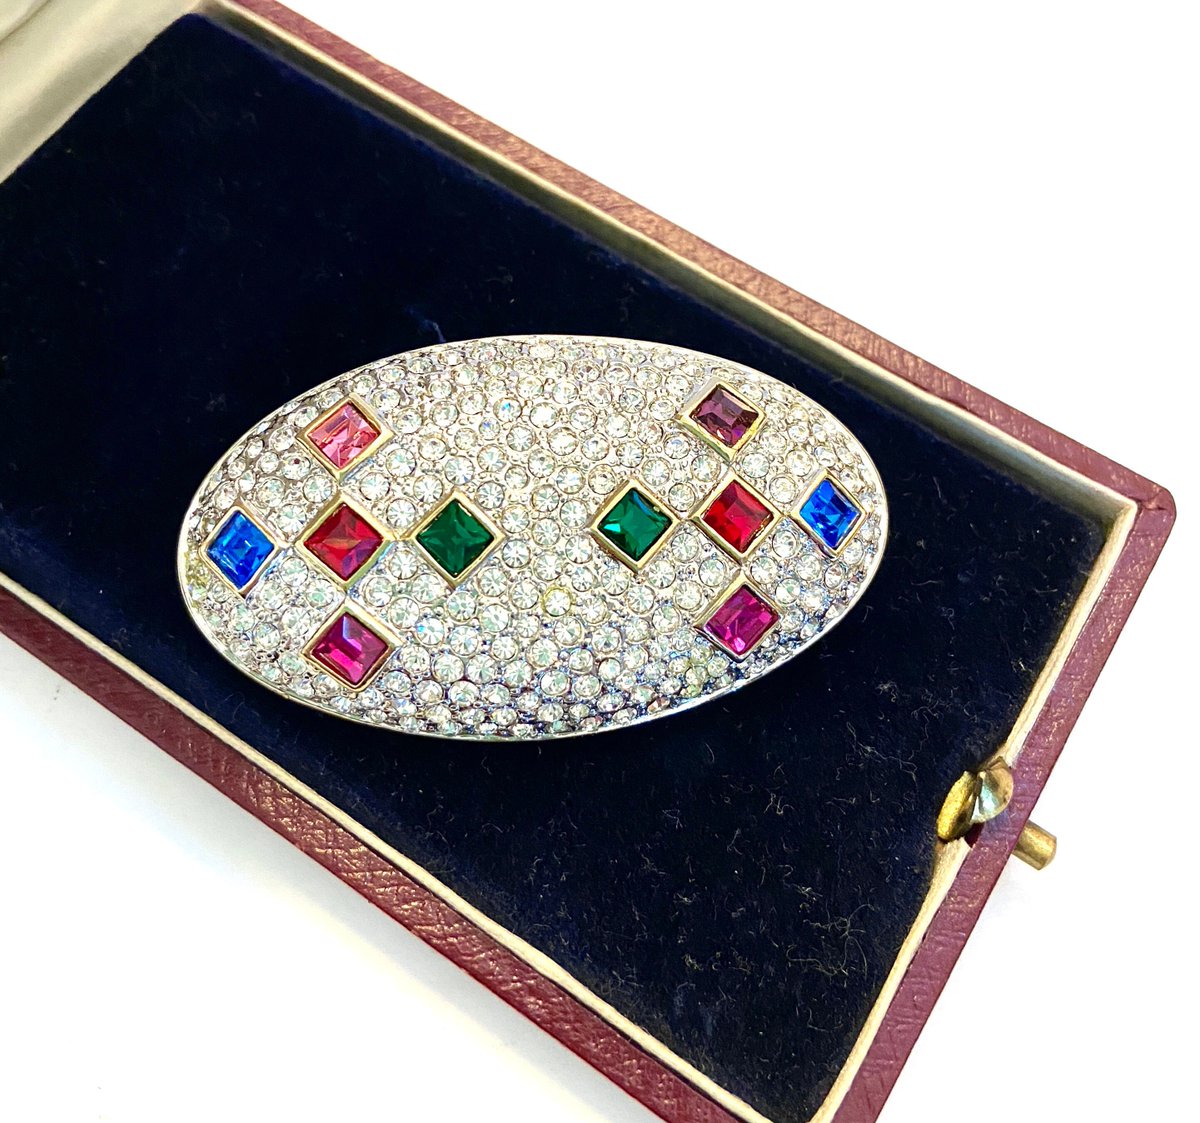 Multi-Color Rhinestone Brooch Large Oval Shape Slightly Domed Encrusted w Clear Rhinestones & Multi Color Square Cut Stones Gift for Her #VintagePin #VintageBrooch 
$63.00
➤ etsy.com/listing/919816…